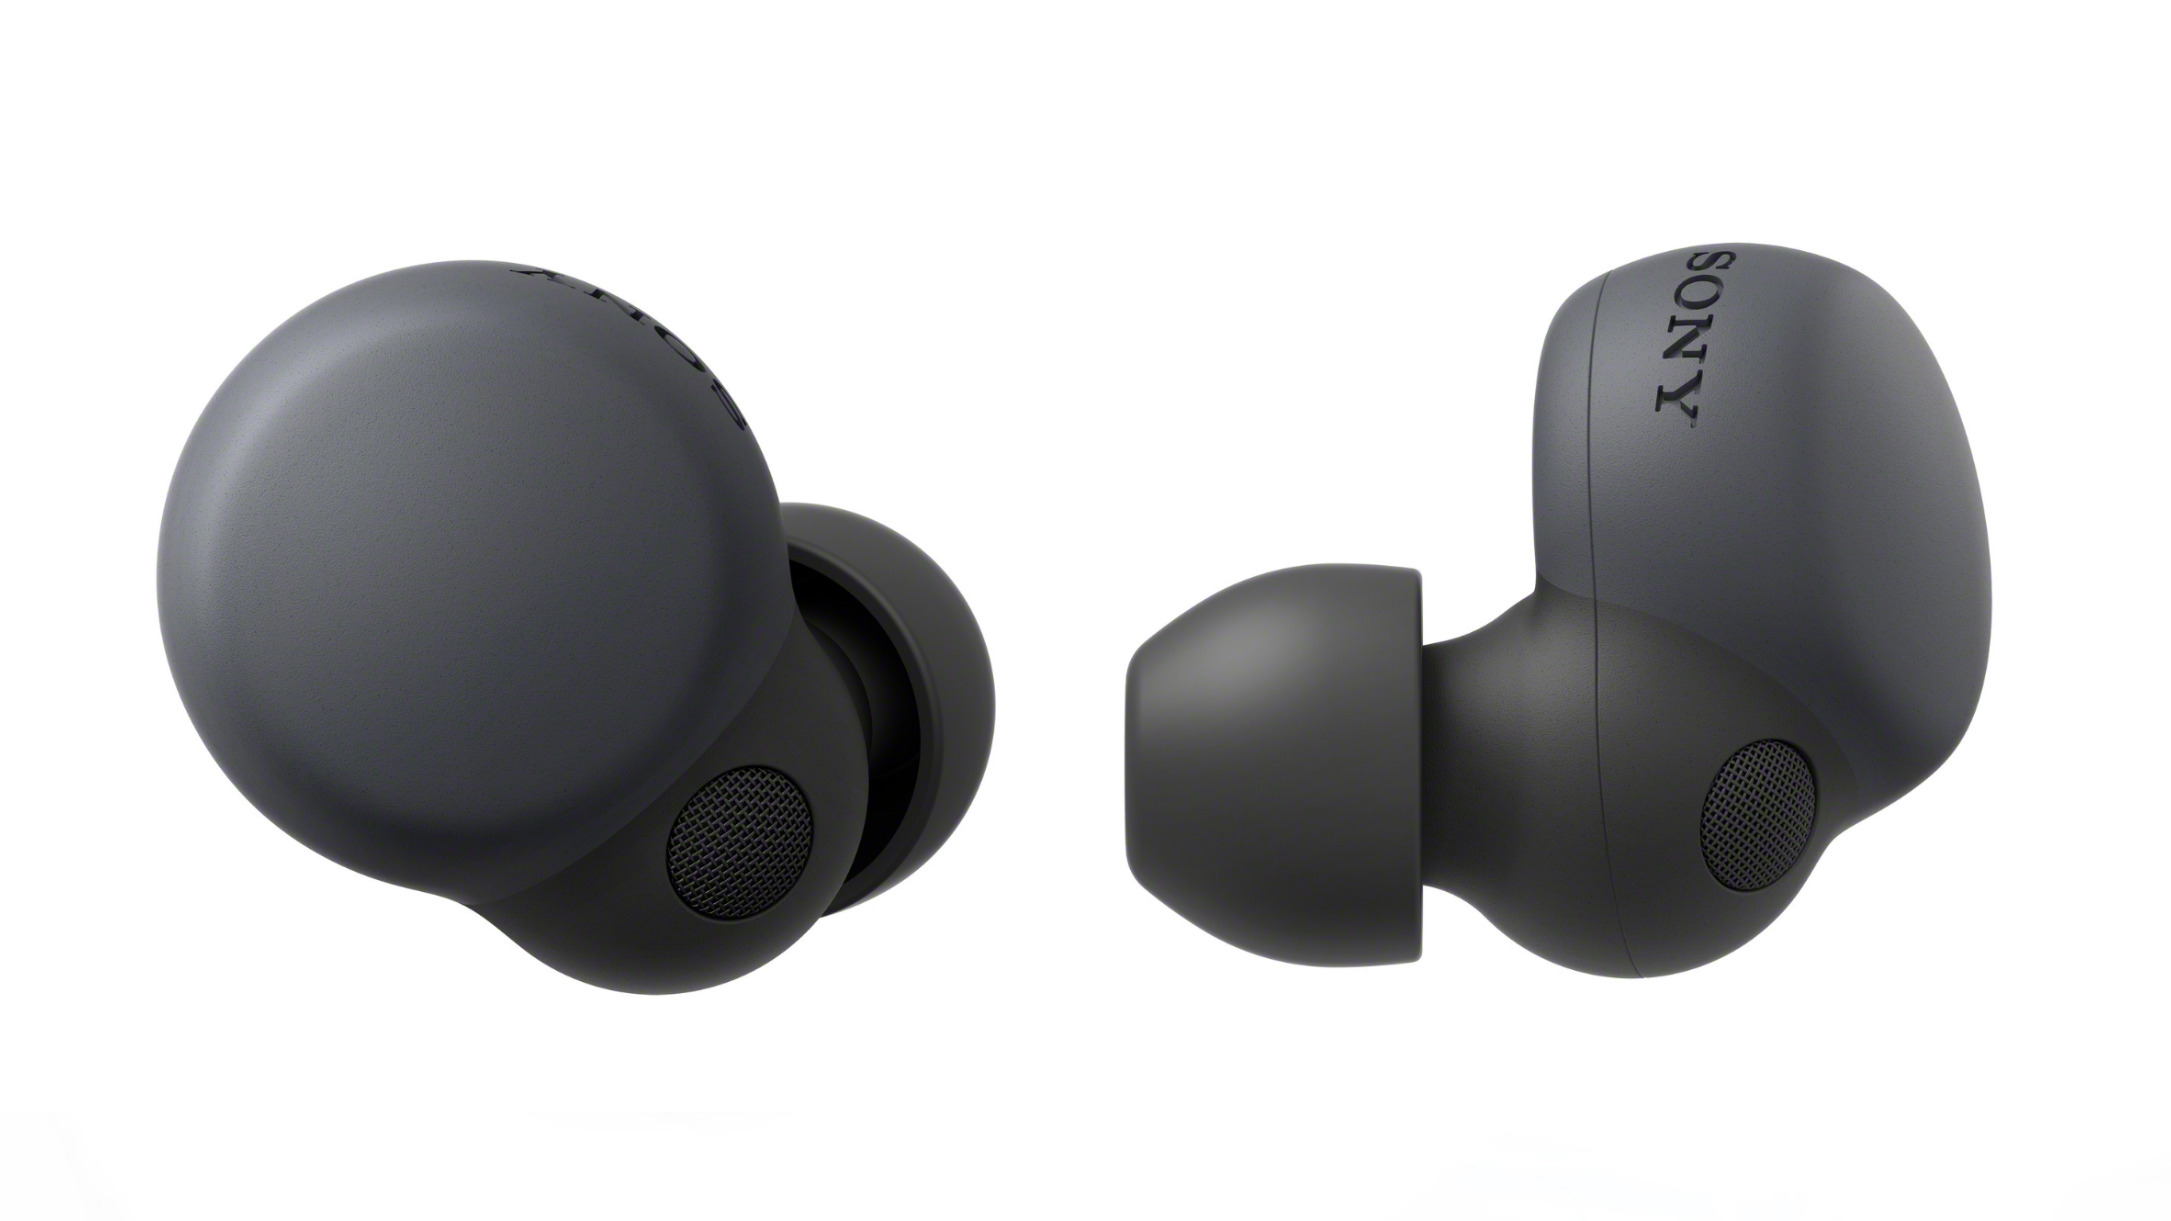 Sony's new LinkBuds S offer a more conventional design with ANC for $200